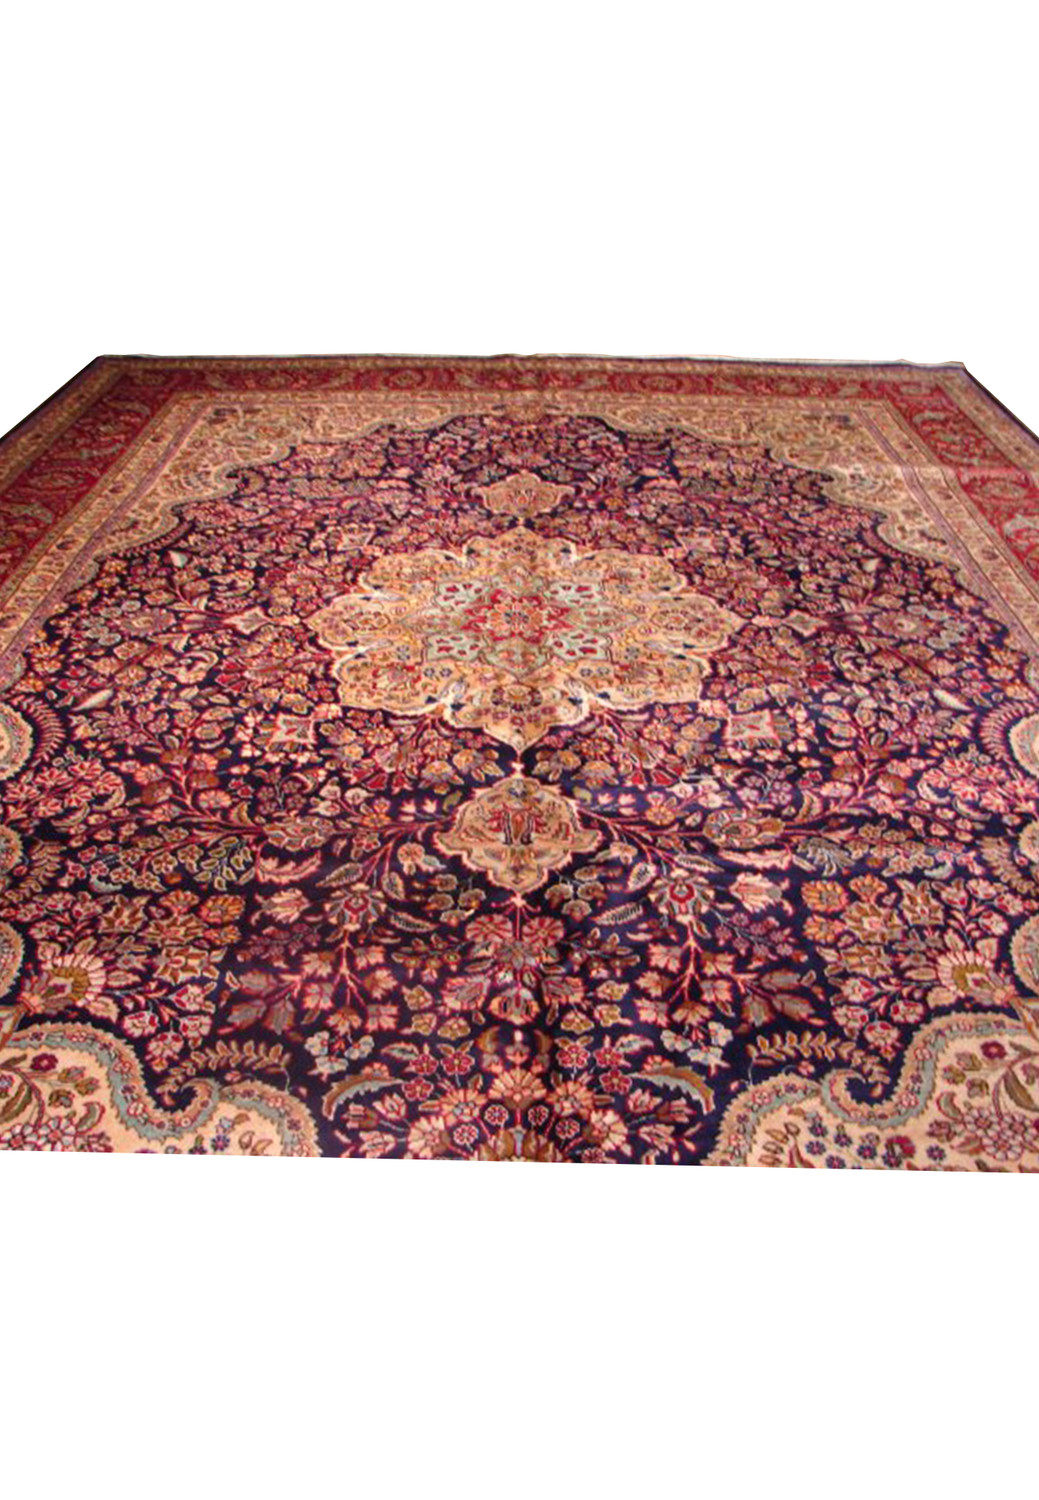 Image showcasing the detailed wide border of a Mashad rug with elaborate red and beige patterns on a navy background